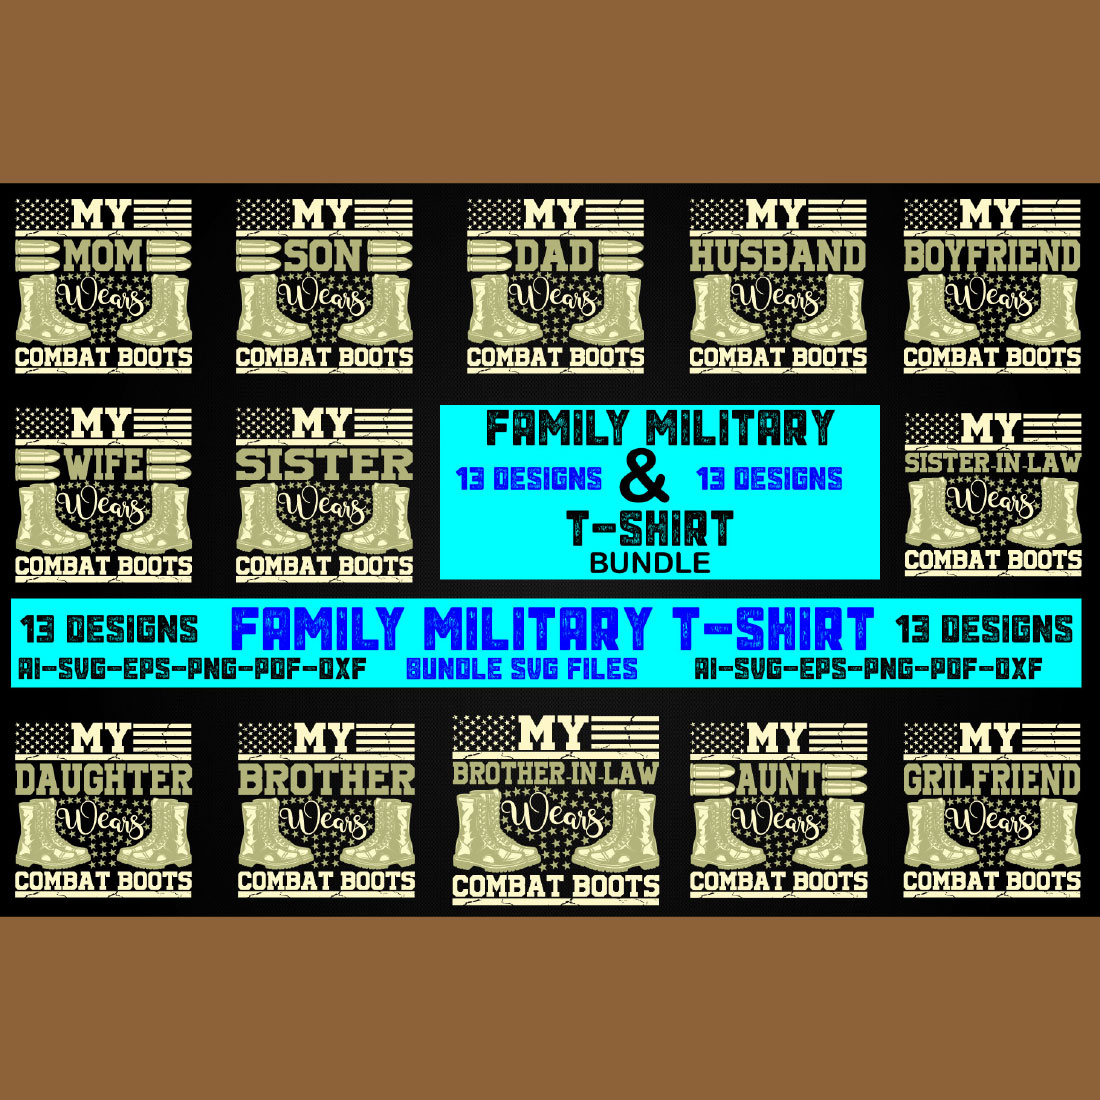 Military Family Military SVG Bundle cover image.